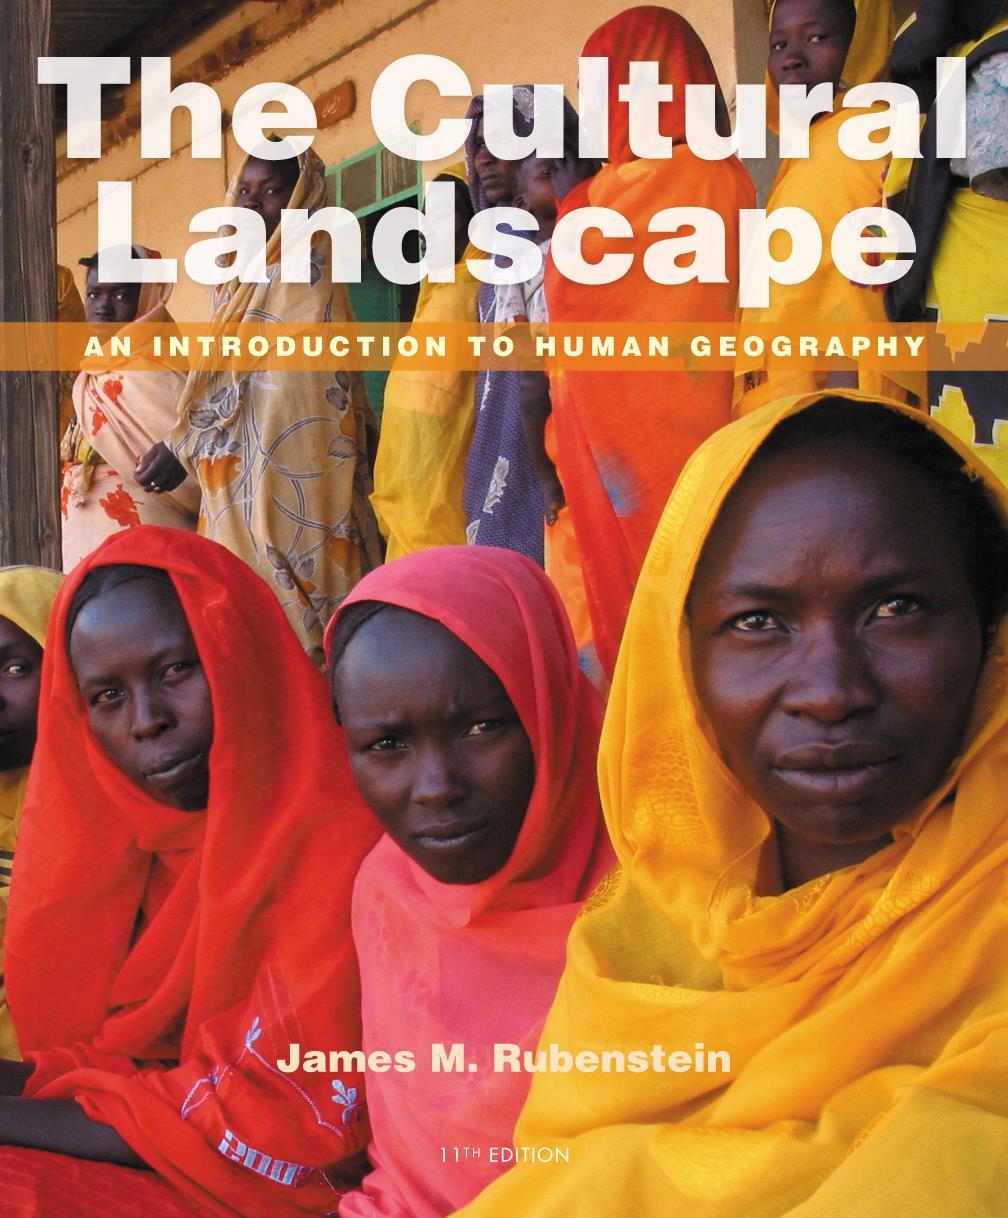 Chapter 6 Lecture The Cultural Landscape Eleventh Edition